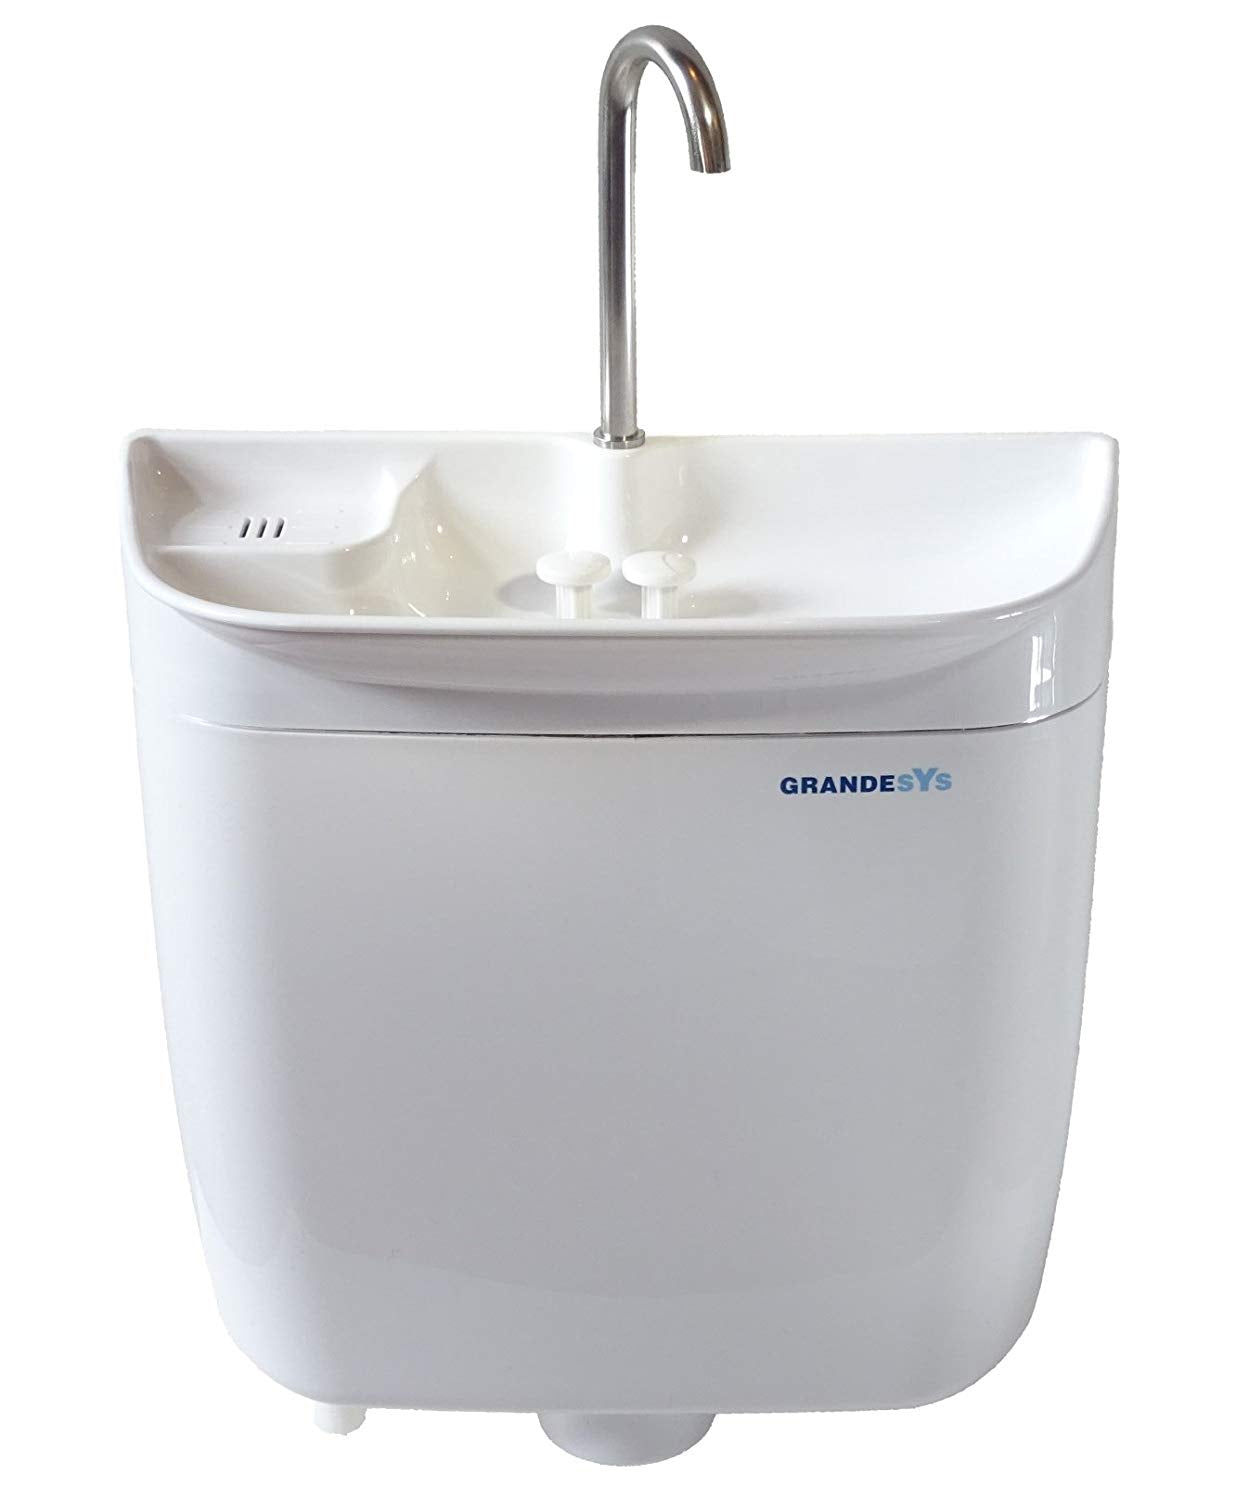 GrandeSys (AquaDue) Toilet cistern with integrated sink SPARES ...